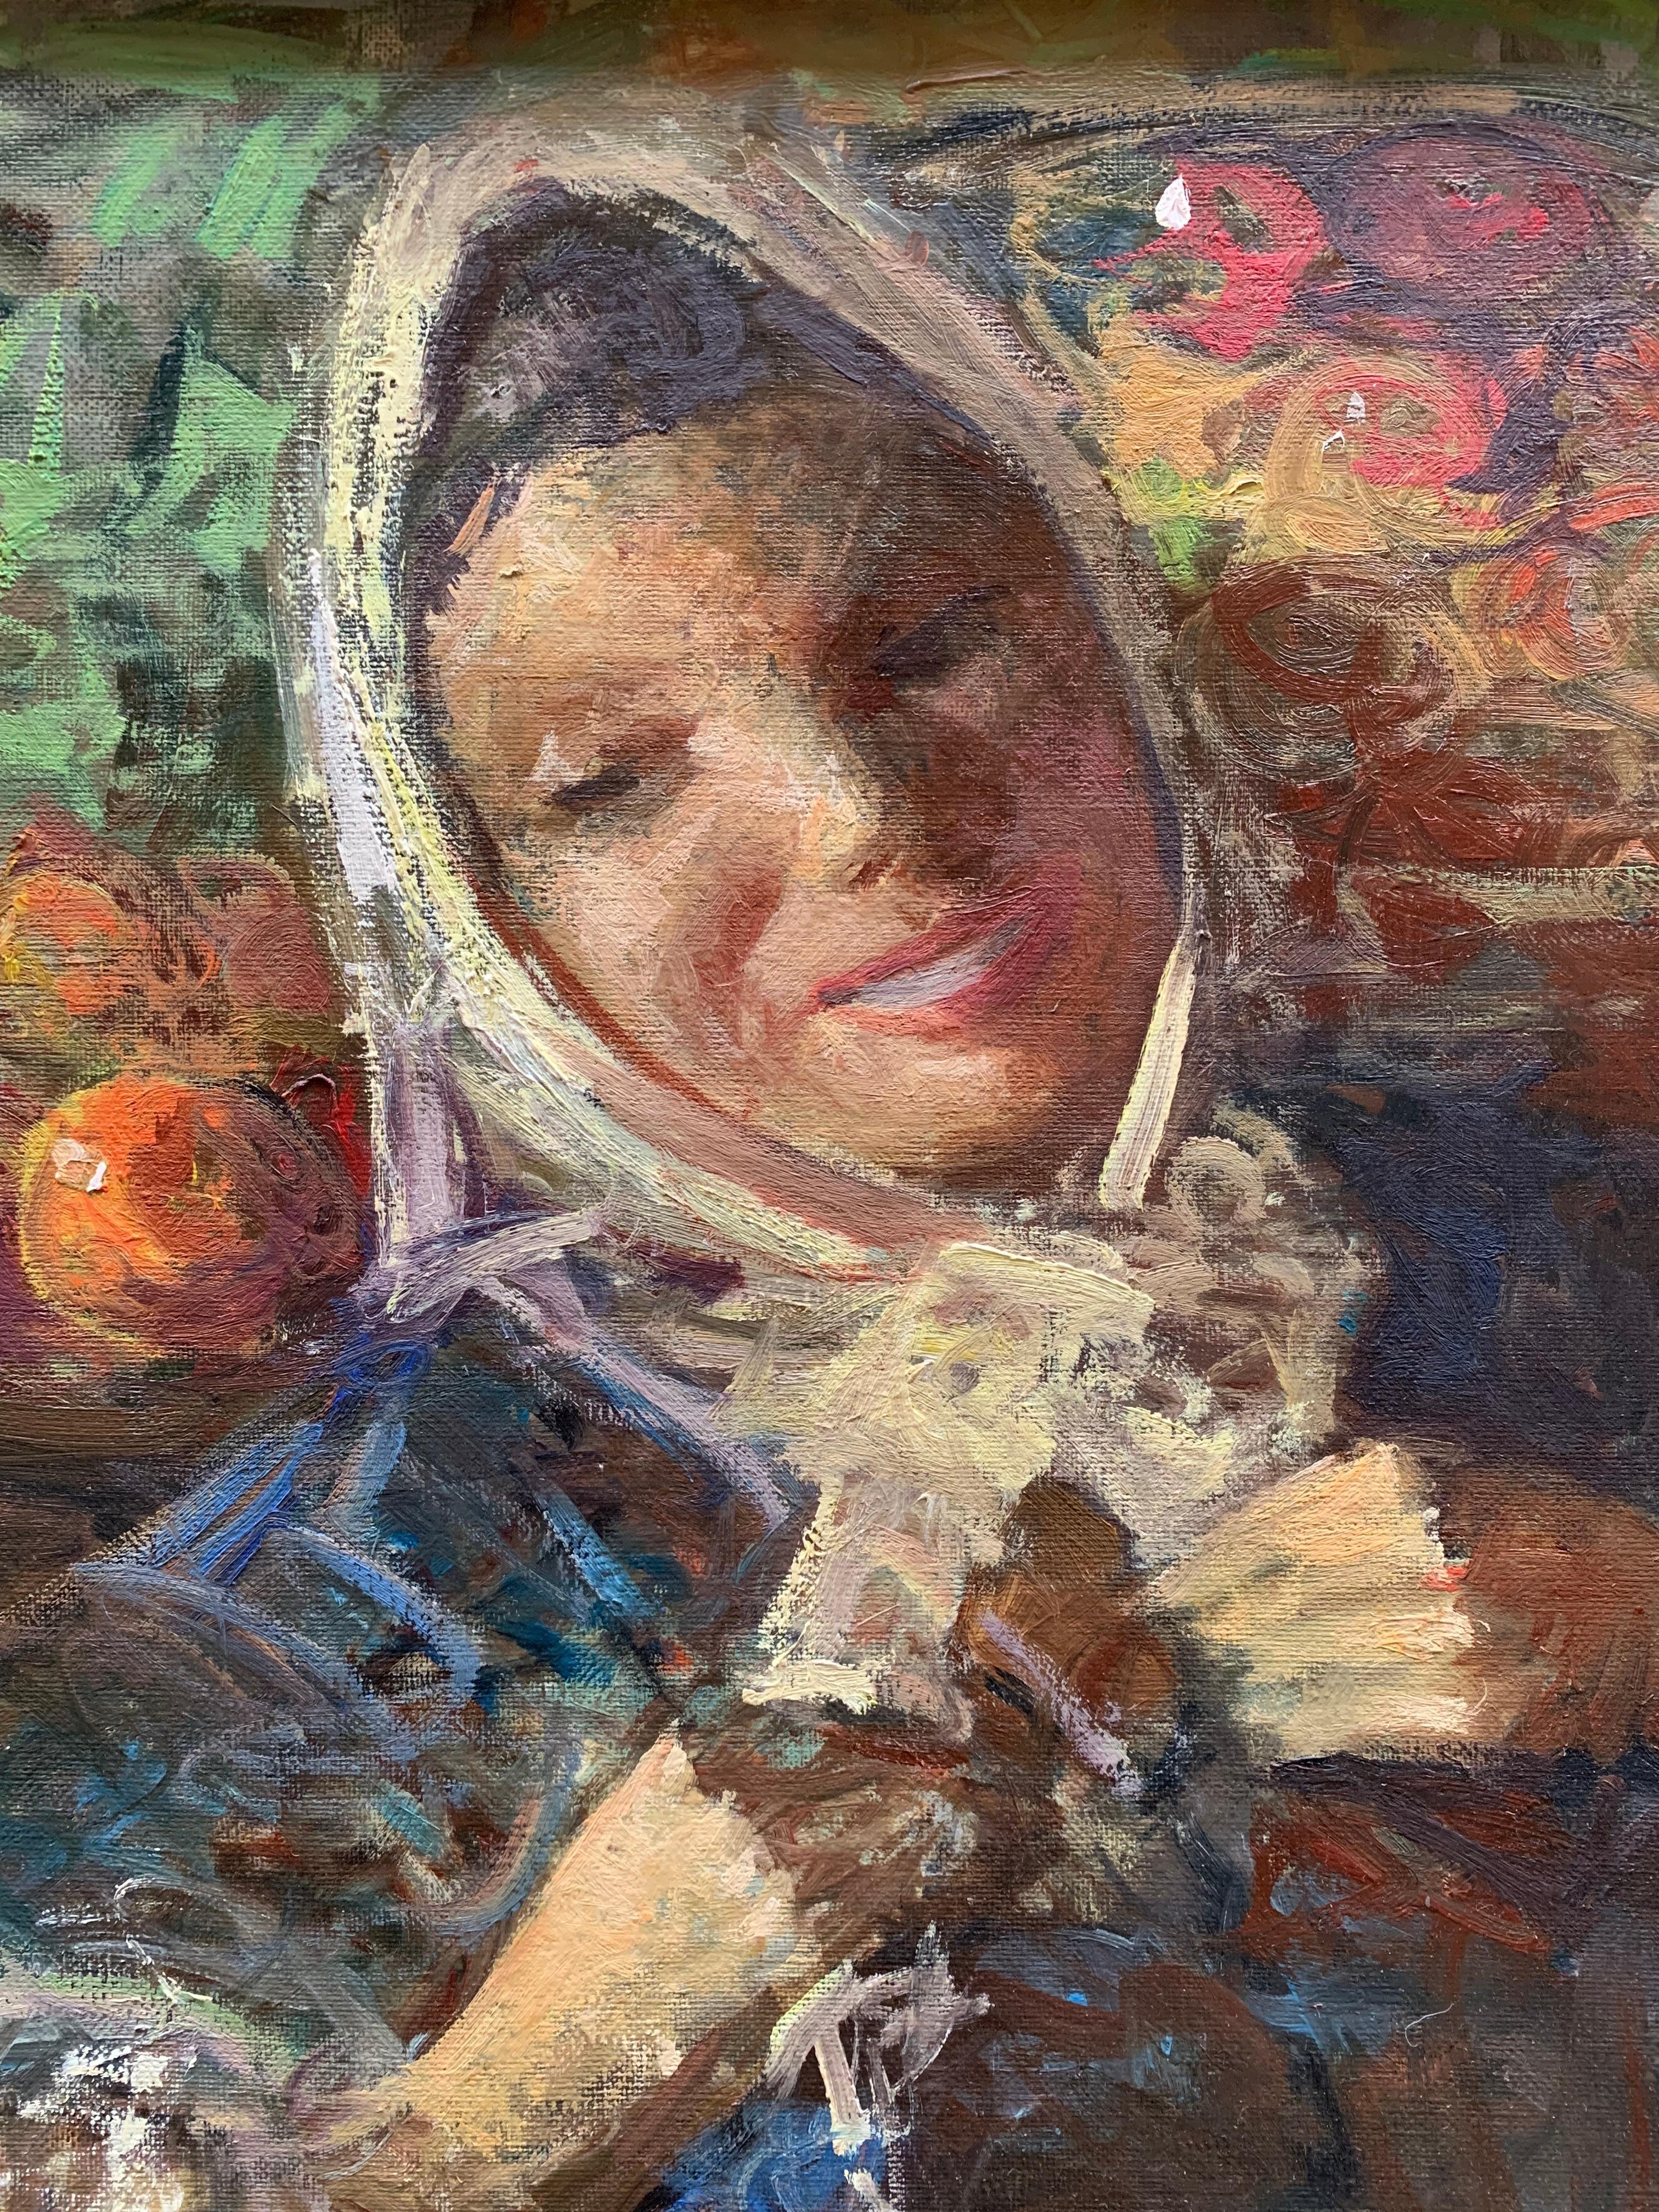 Girl with fruit. Market. Year 1958. Signed Sergio Cirno Bissi (Carmignano, 1902 - Florence, 1987).
The very colorful and expressive painting is created by the Tuscan painter, active in Florence. The author of the painting captures an expression of